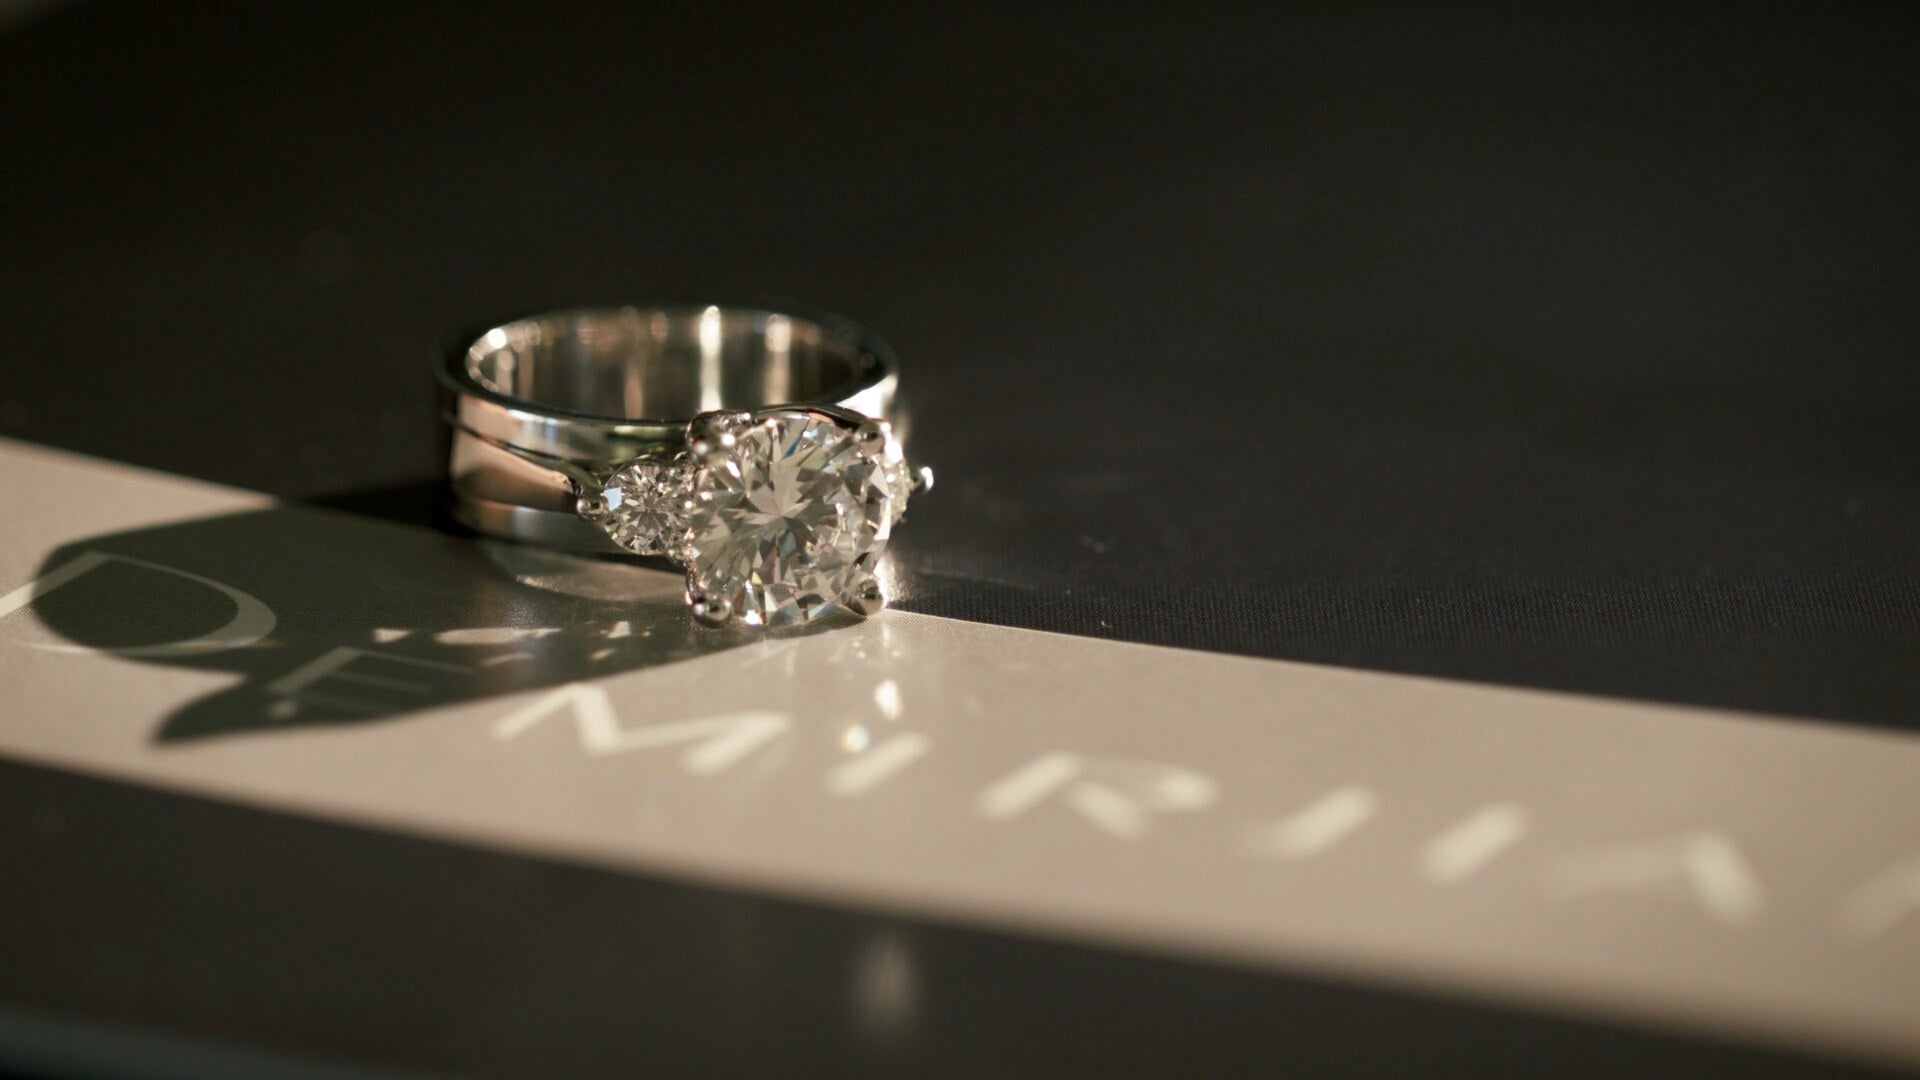 A diamond ring from Demirjian Jewelry Design, sitting on a table.